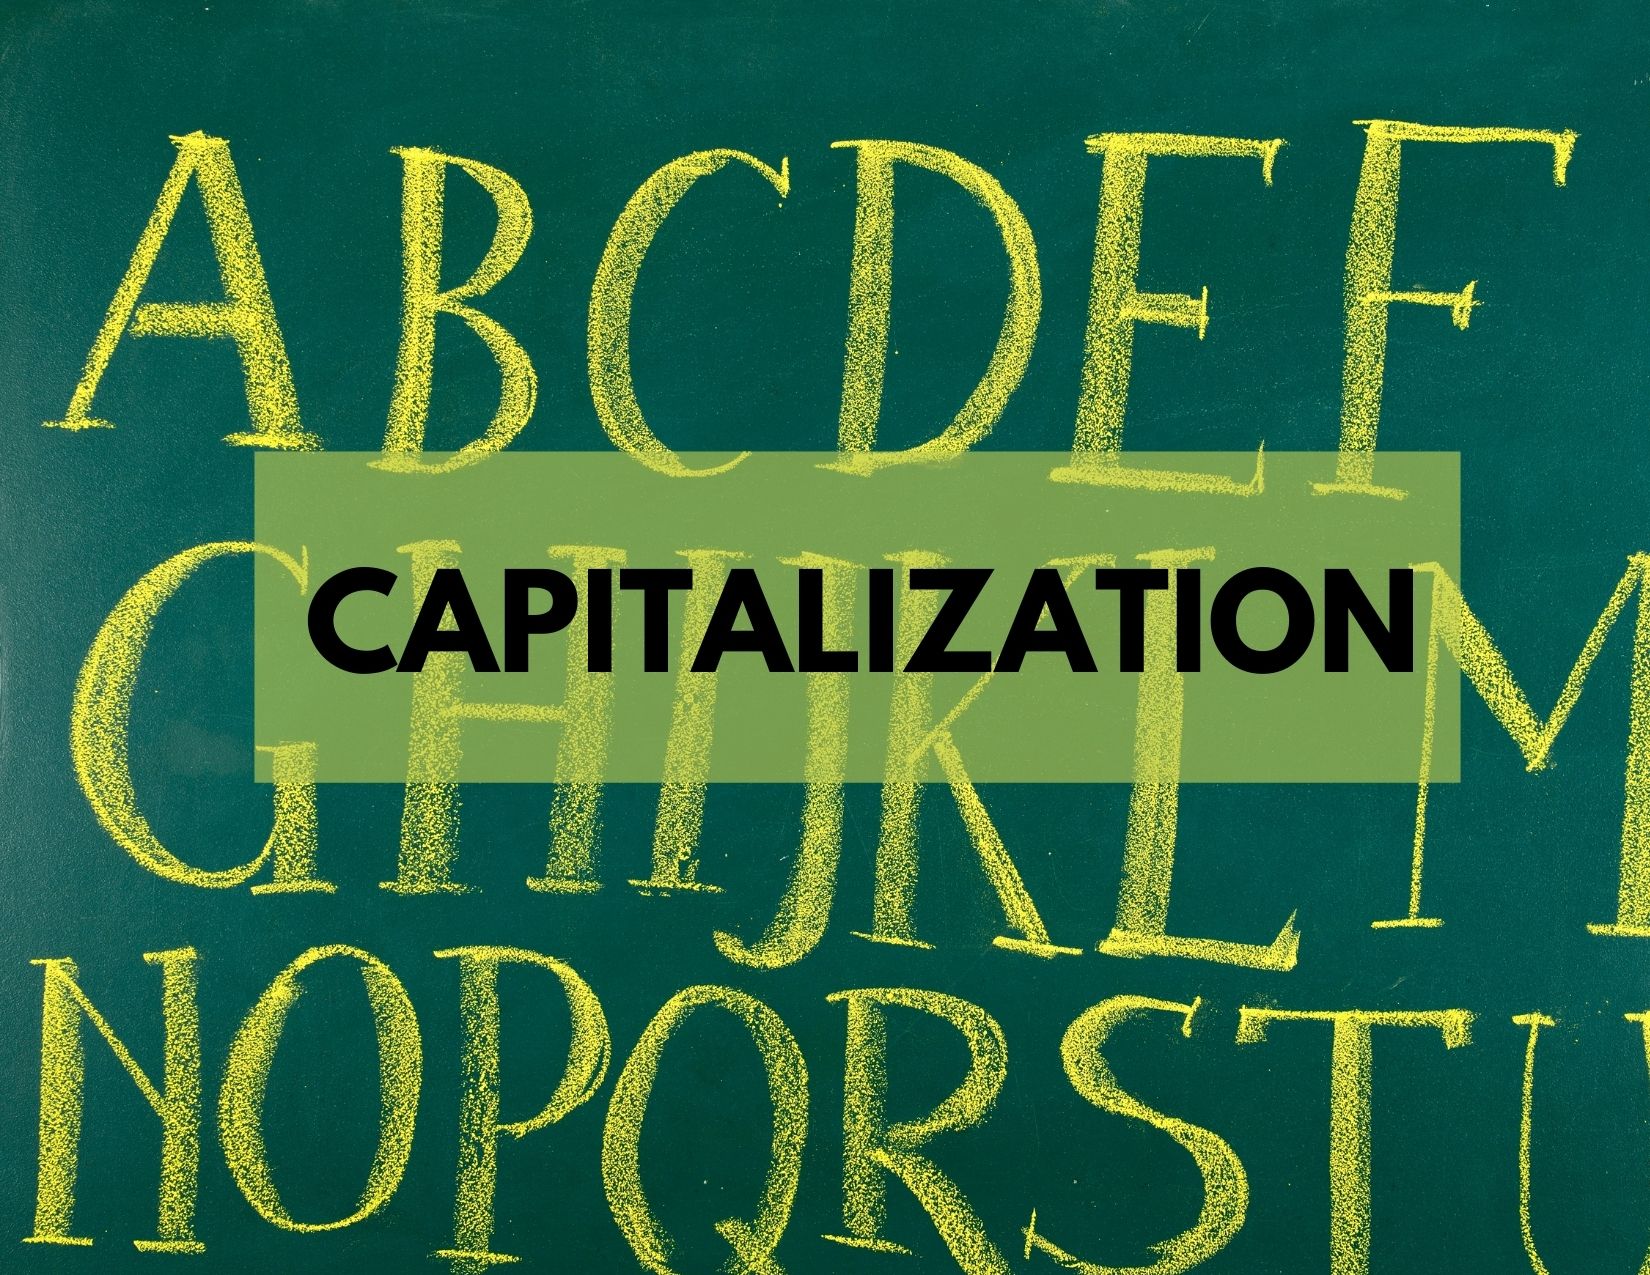 A graphic showing capital letters with the caption 